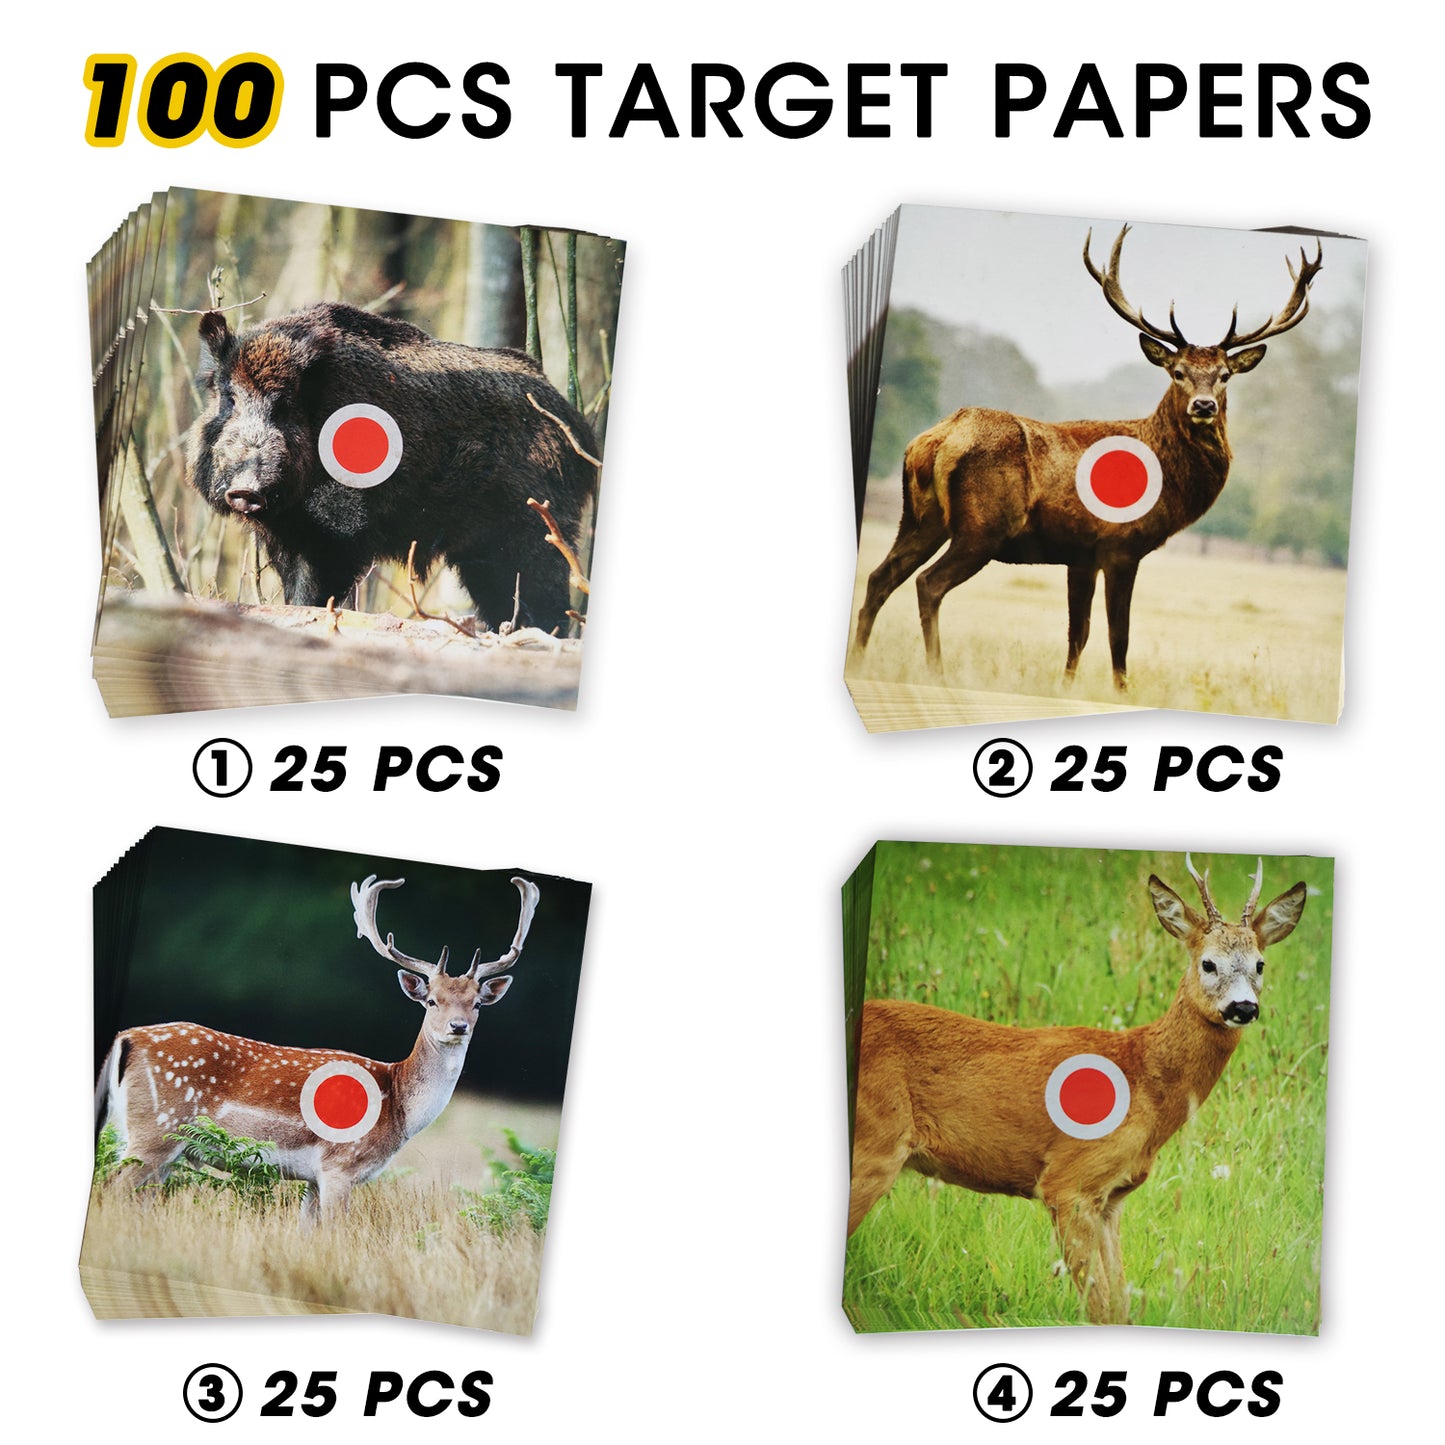 Atflbox Animals 5.5 Inch Paper Targets for BB Pellet Trap Shooting Target Holder, Pack of 100